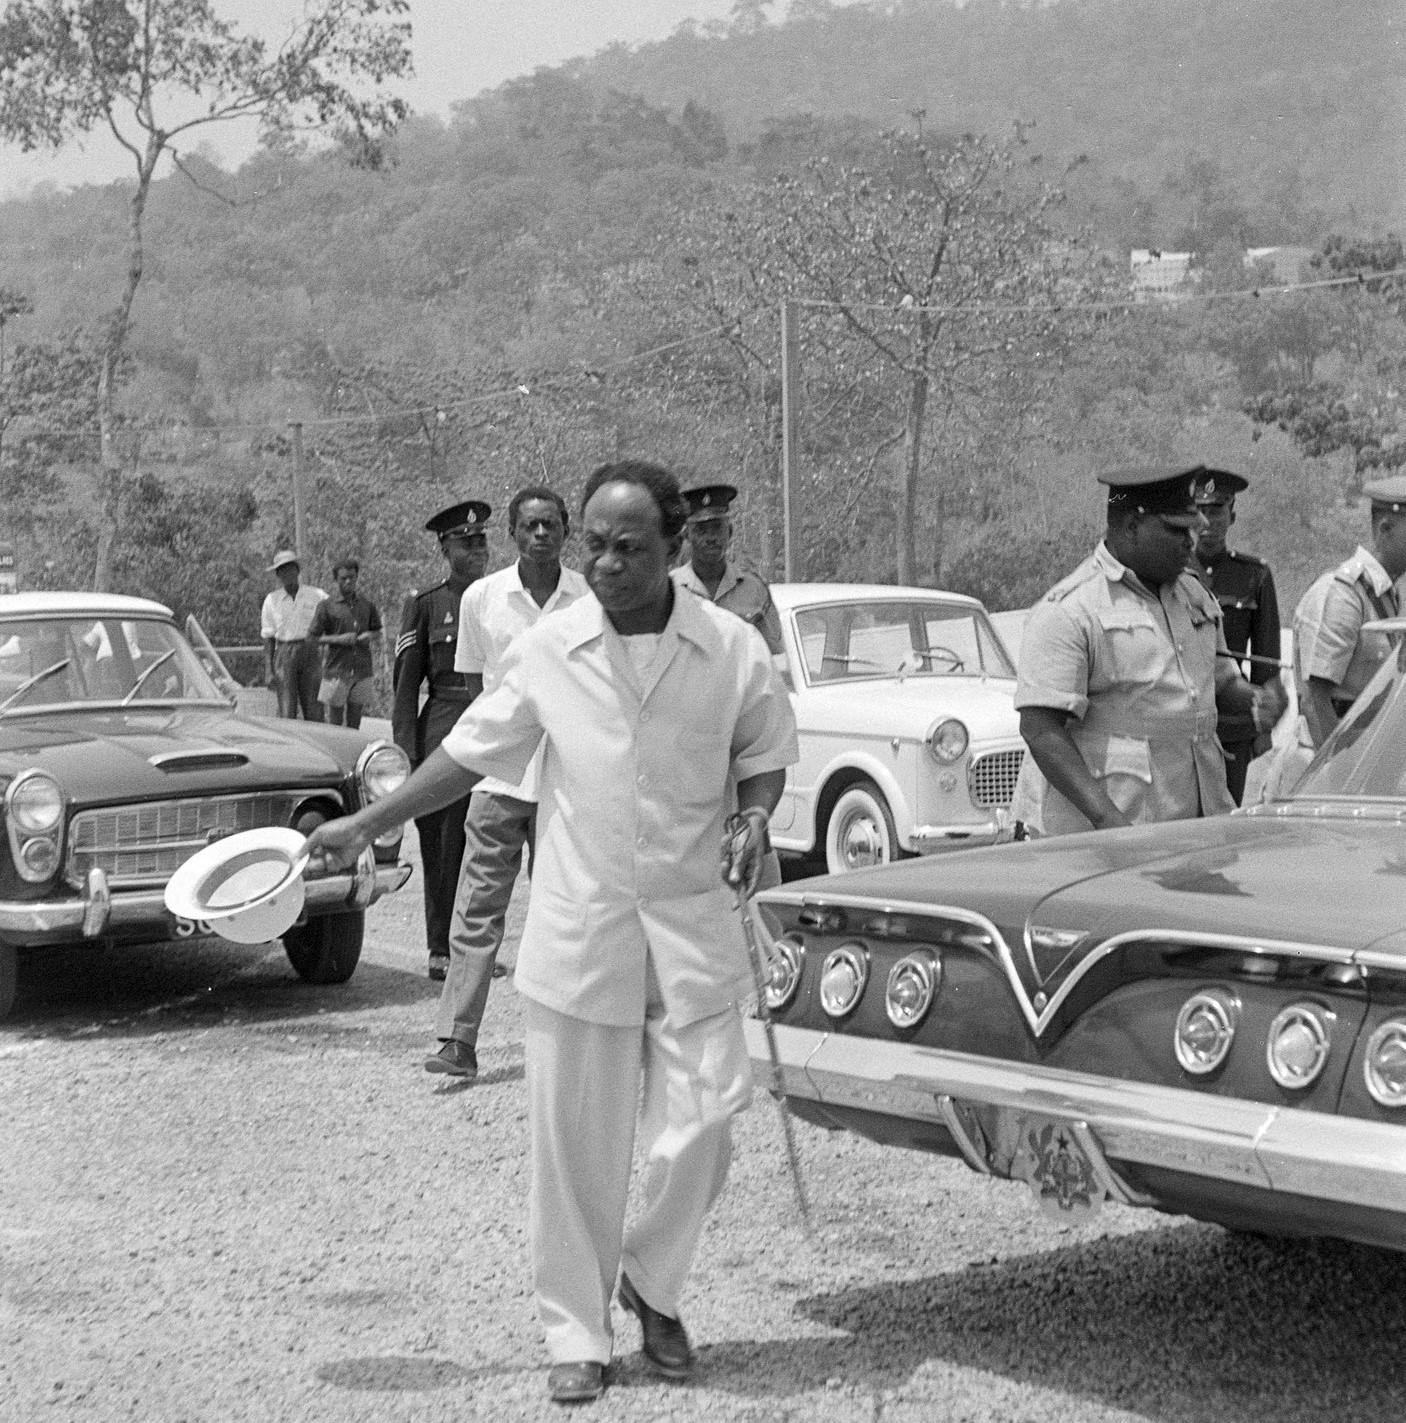 An African man in the foreground wearing a white suit and waving a white hat next to a 1960s Chevrolet car. More men, cars and forest in the background.